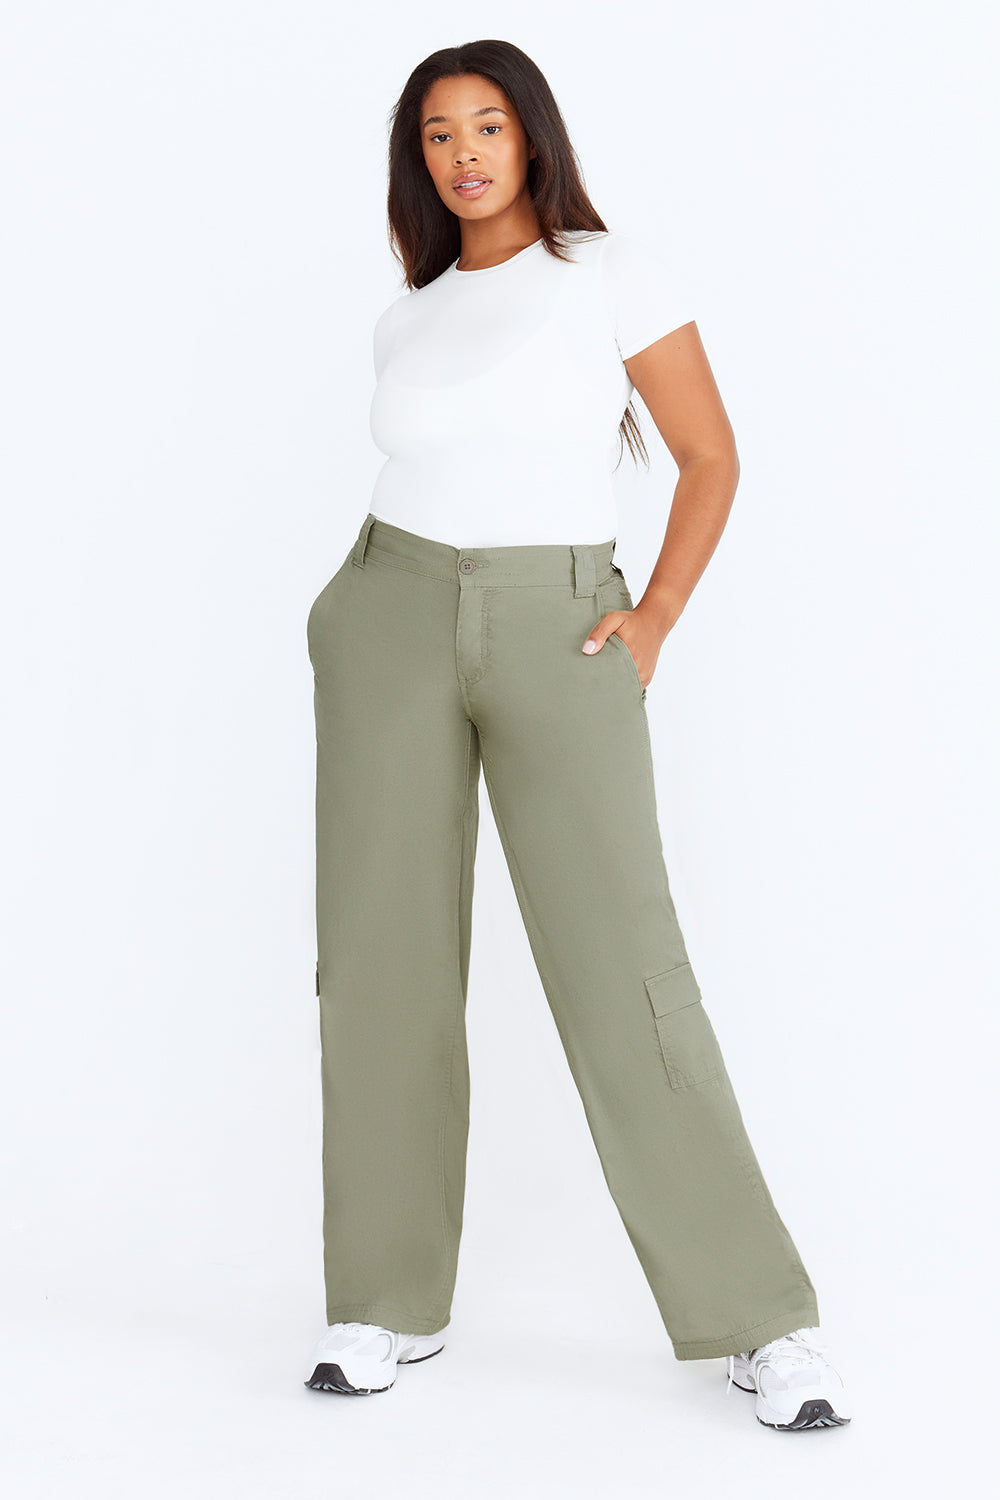 Adjustable Straight Fit Cargo Pants for Women Petite,Adjustable